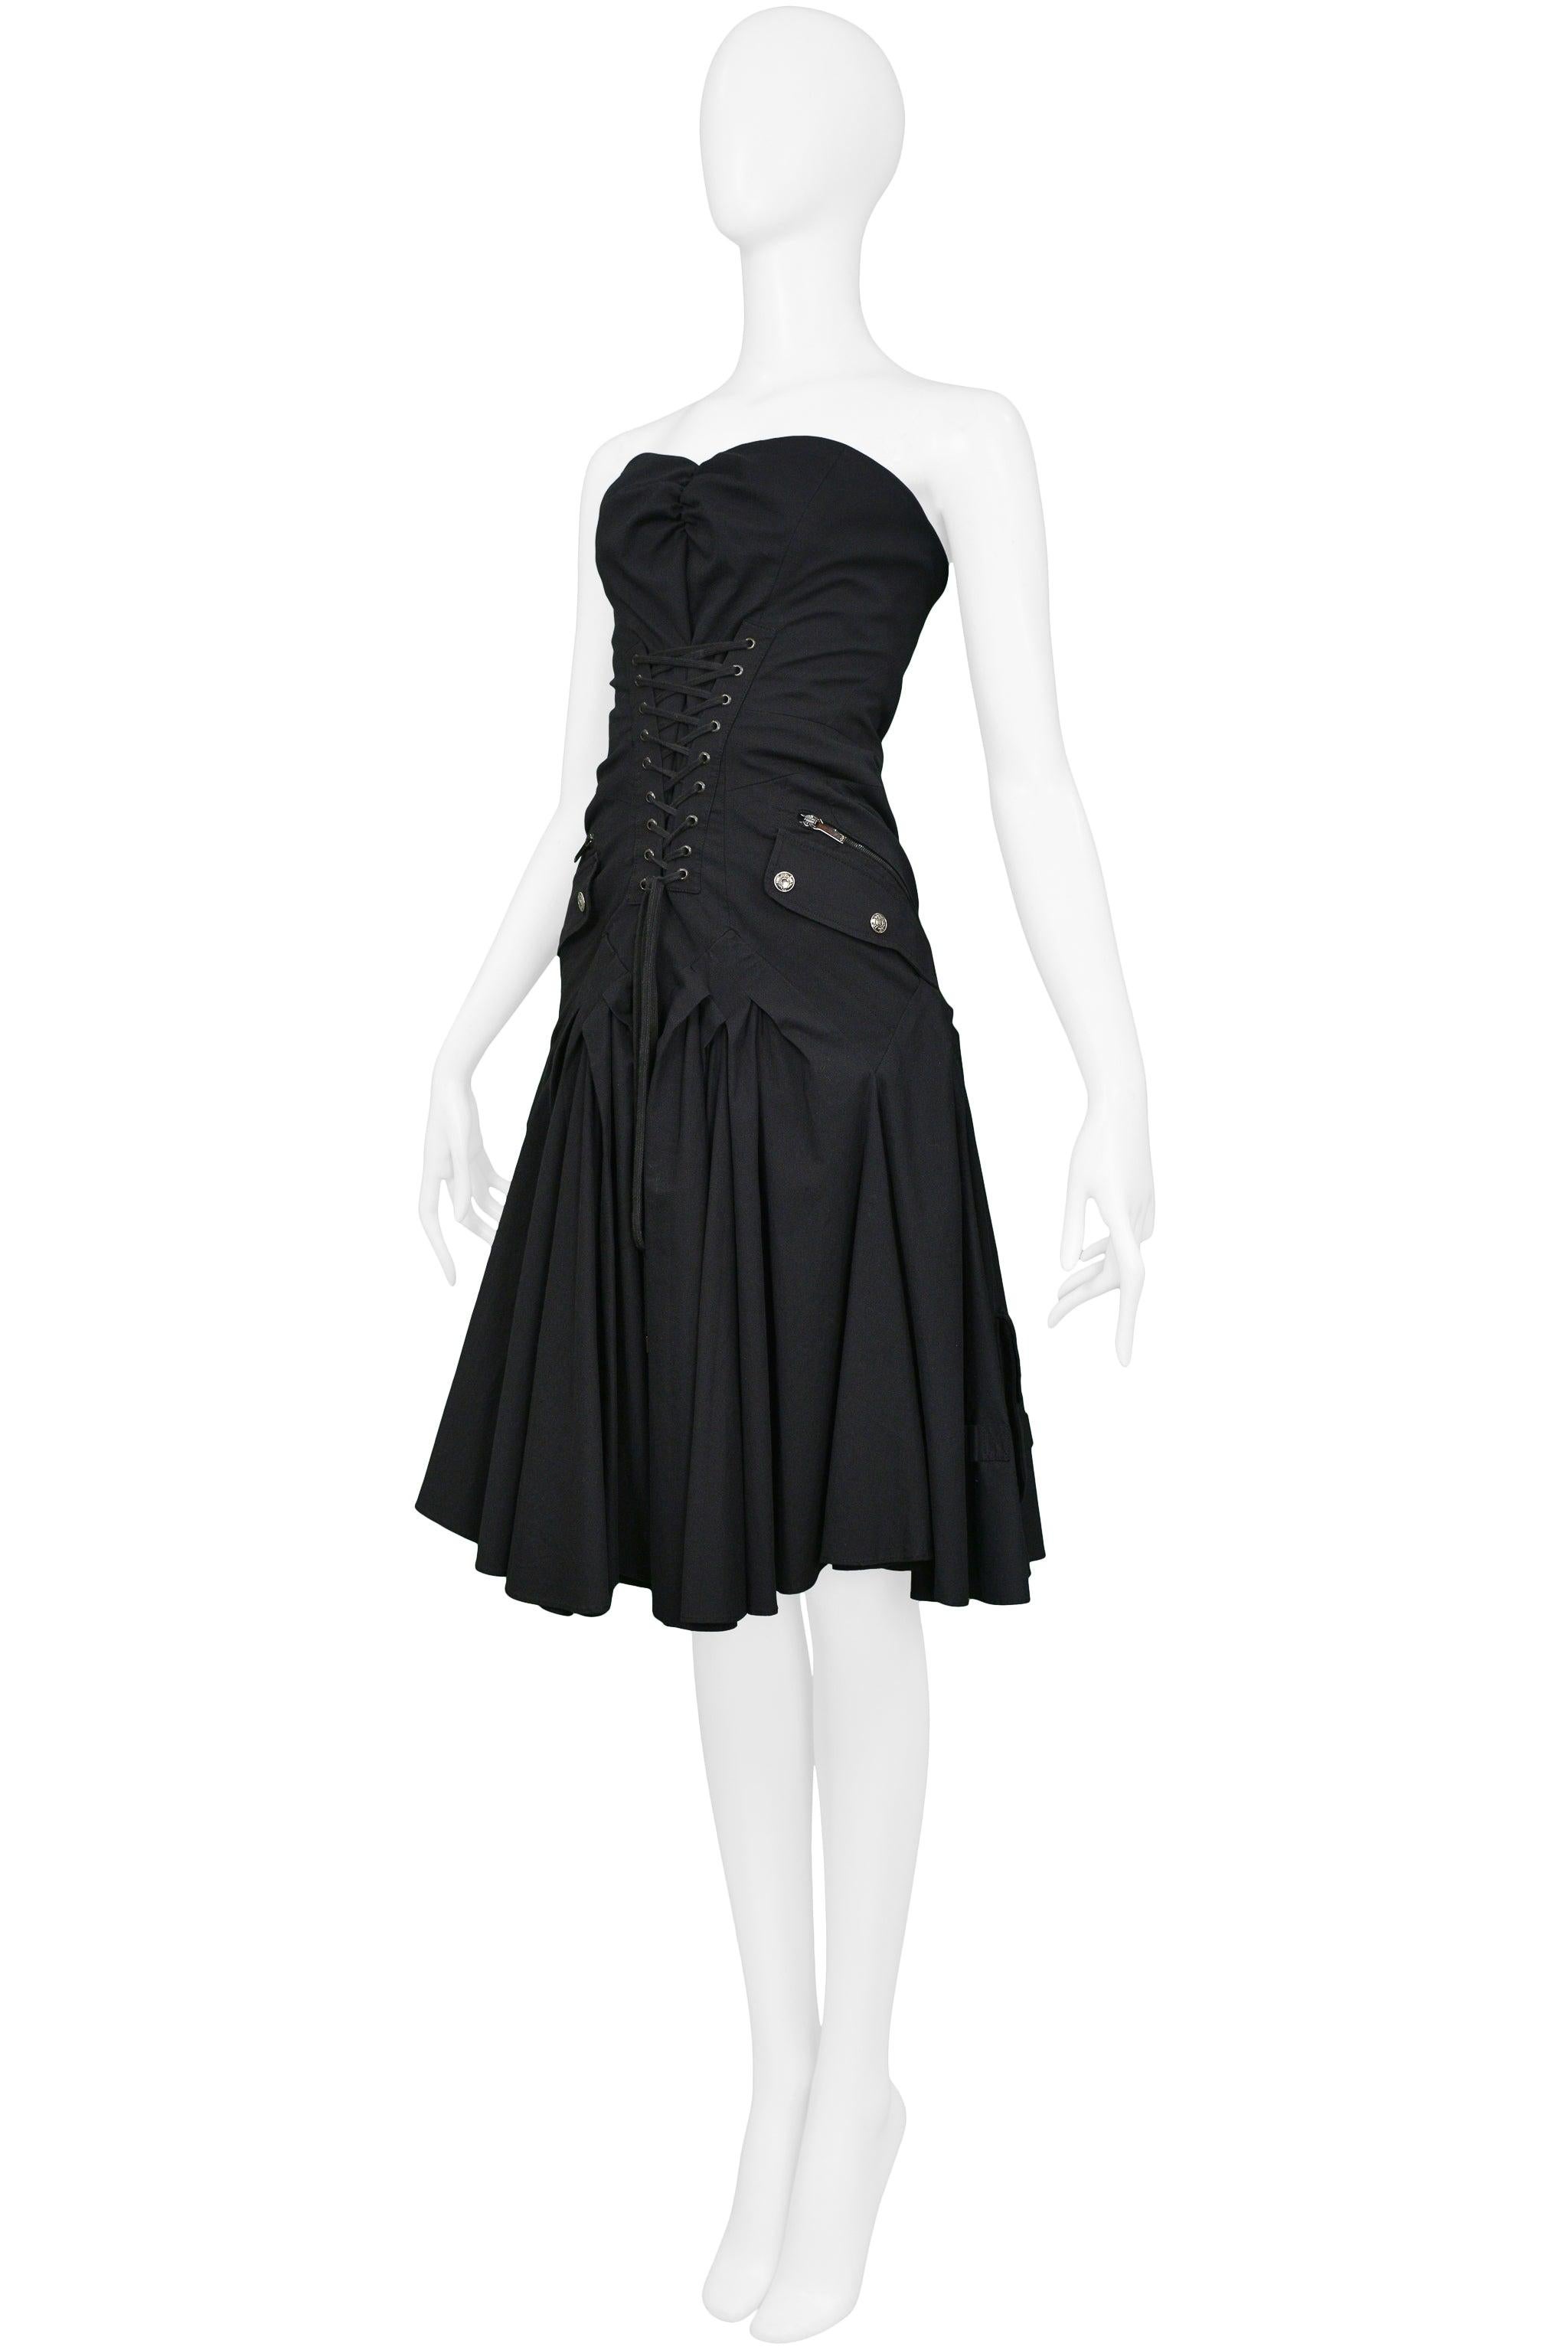 Christian Dior By John Galliano Black Cotton Cargo Dress 2003 In Excellent Condition For Sale In Los Angeles, CA